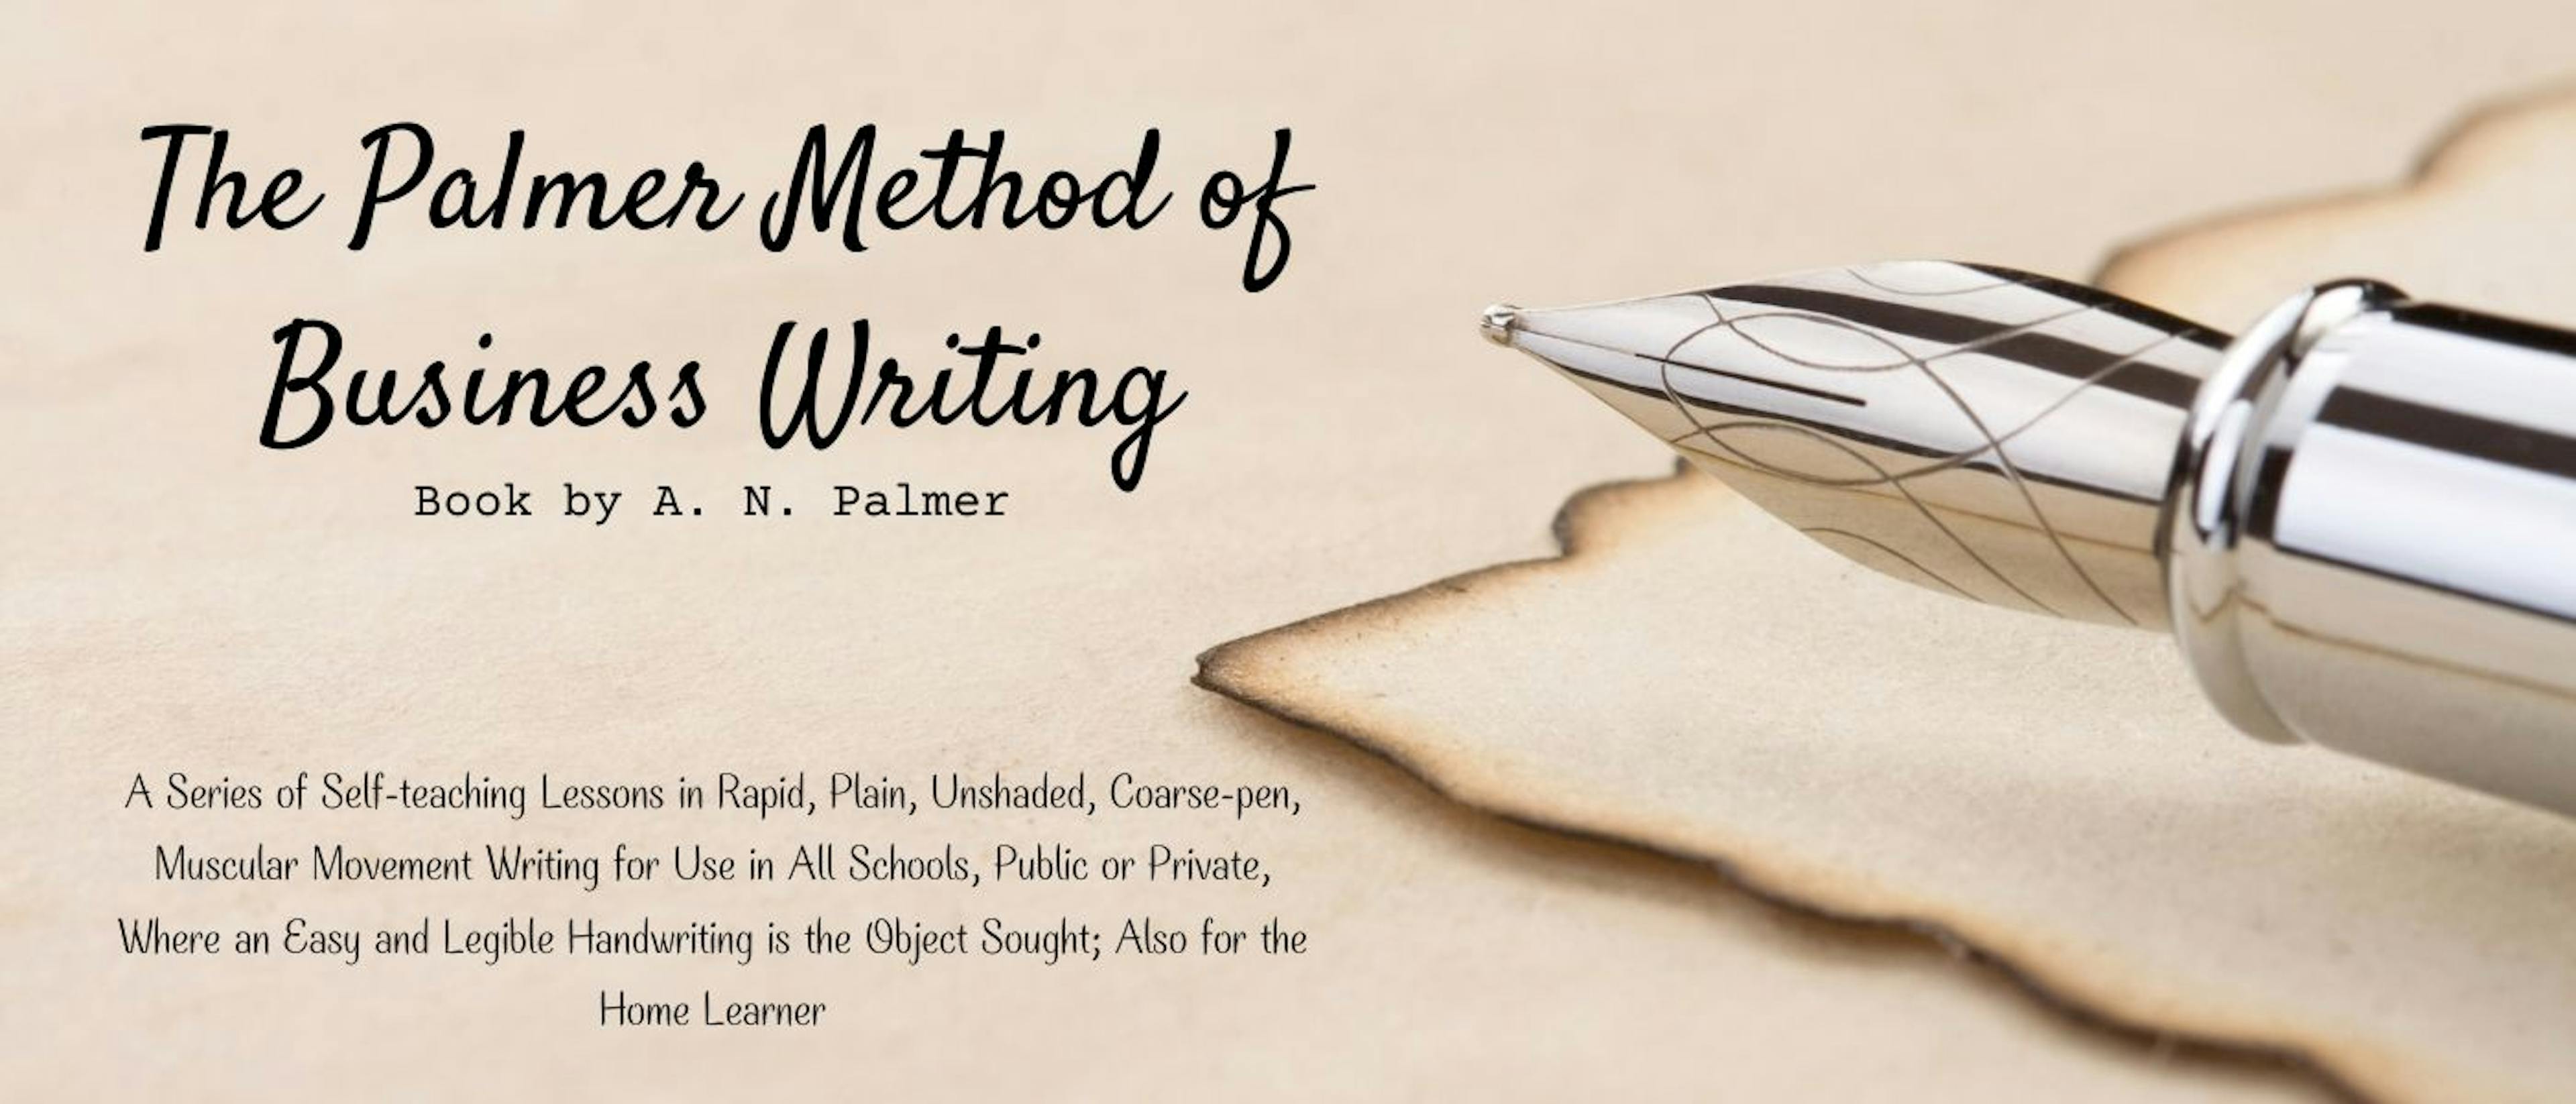 featured image - The Palmer Method of Business Writing: Lesson 32